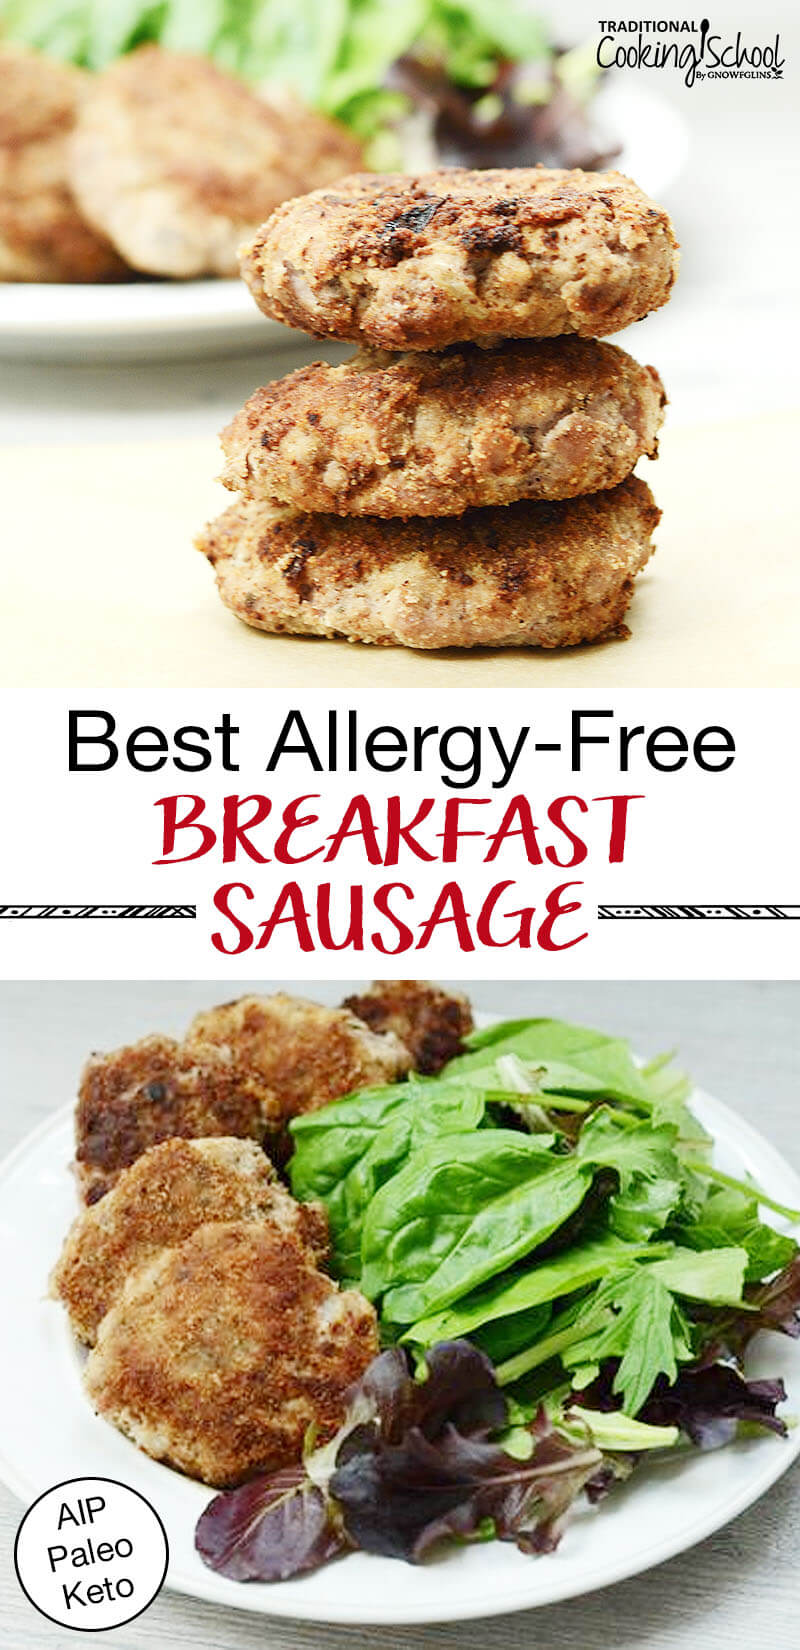 photo collage of crispy sausage patties, in a stack of three, and arranged on a plate with fresh greens, with text overlay: "Best Allergy-Free Breakfast Sausage (AIP, Paleo, Keto)"